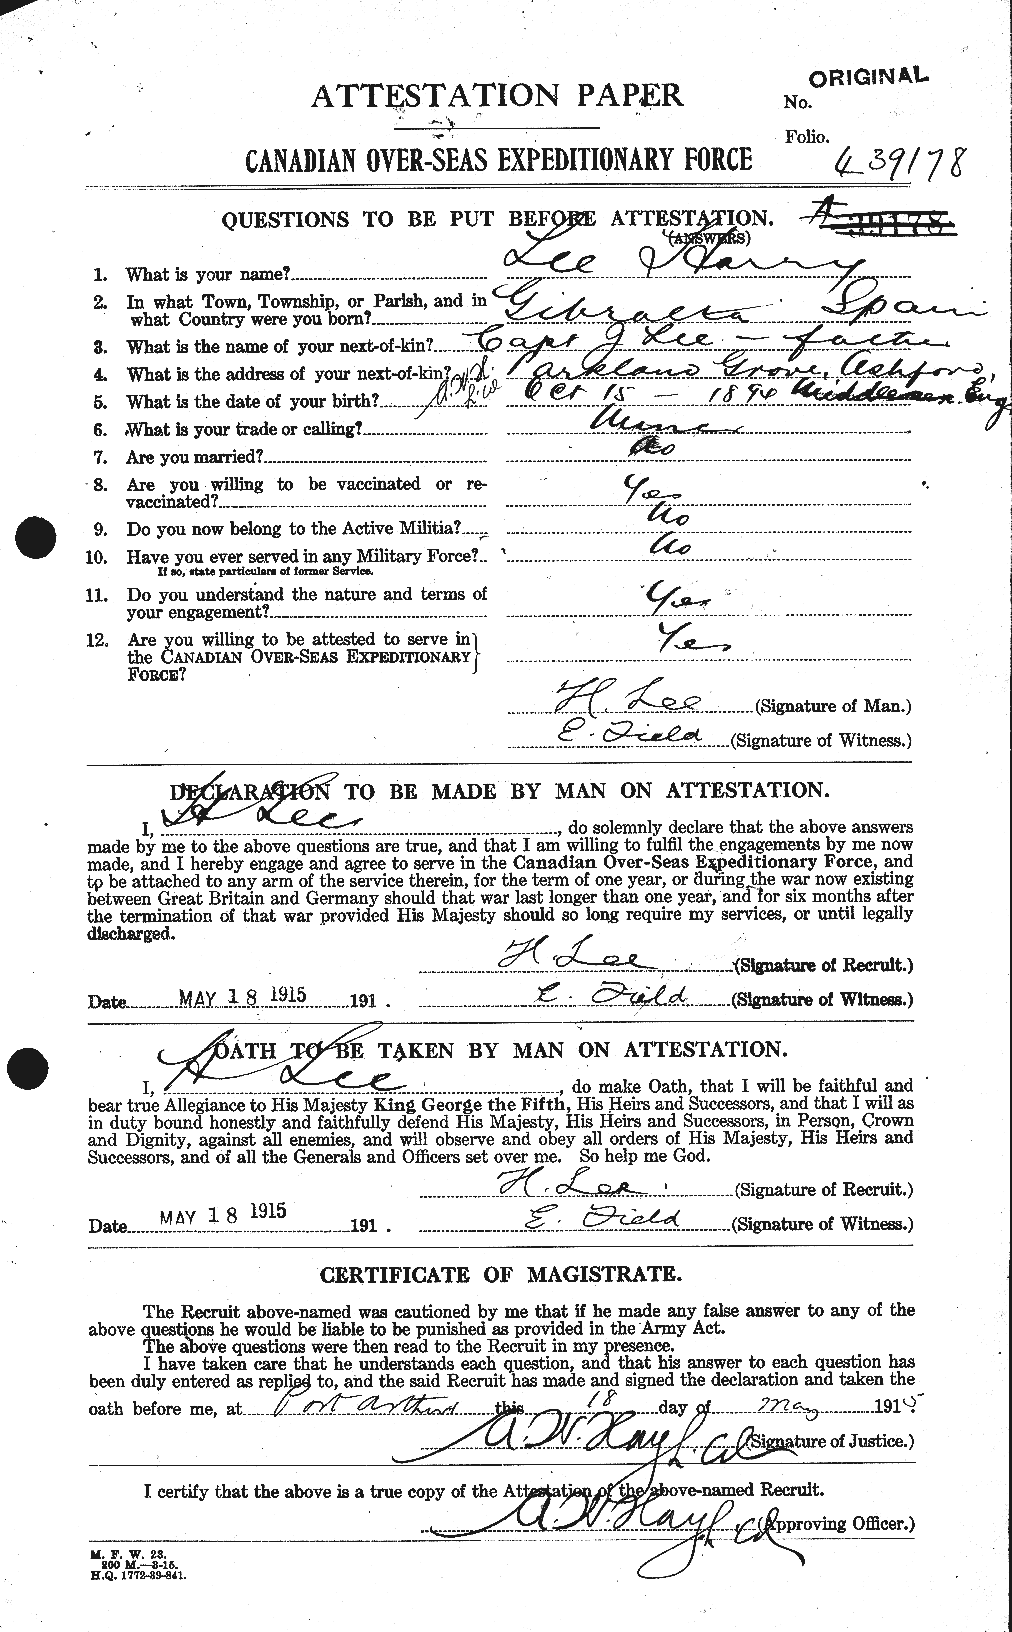 Personnel Records of the First World War - CEF 456827a